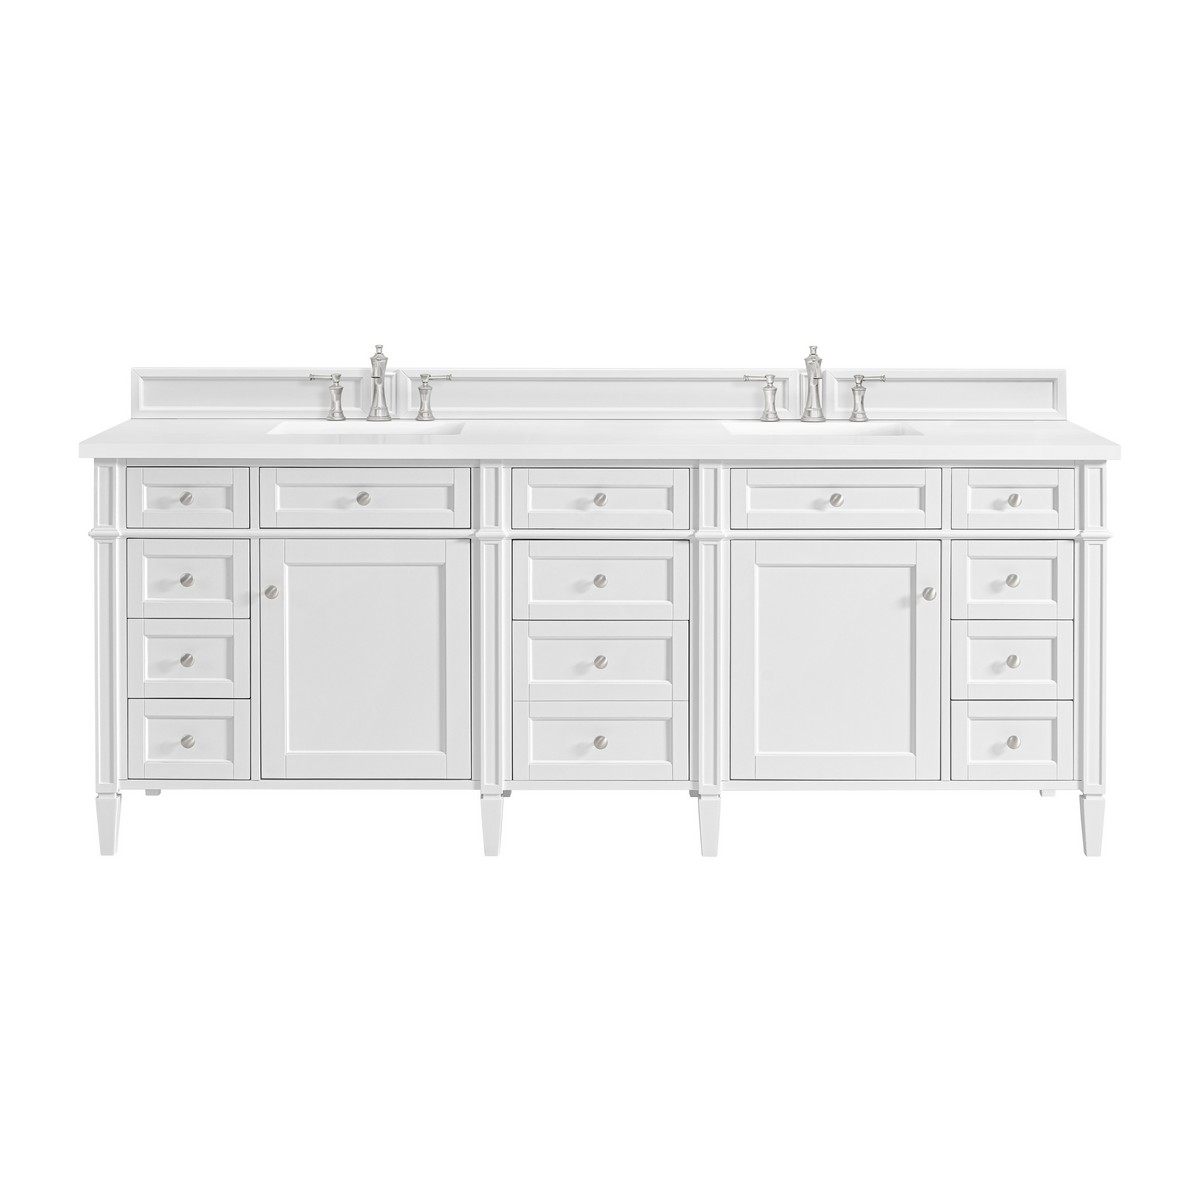 JAMES MARTIN 655-V84-BW-3WZ BRITTANY 84 INCH FREE-STANDING DOUBLE SINK BATHROOM VANITY IN BRIGHT WHITE WITH 3 CM TOP